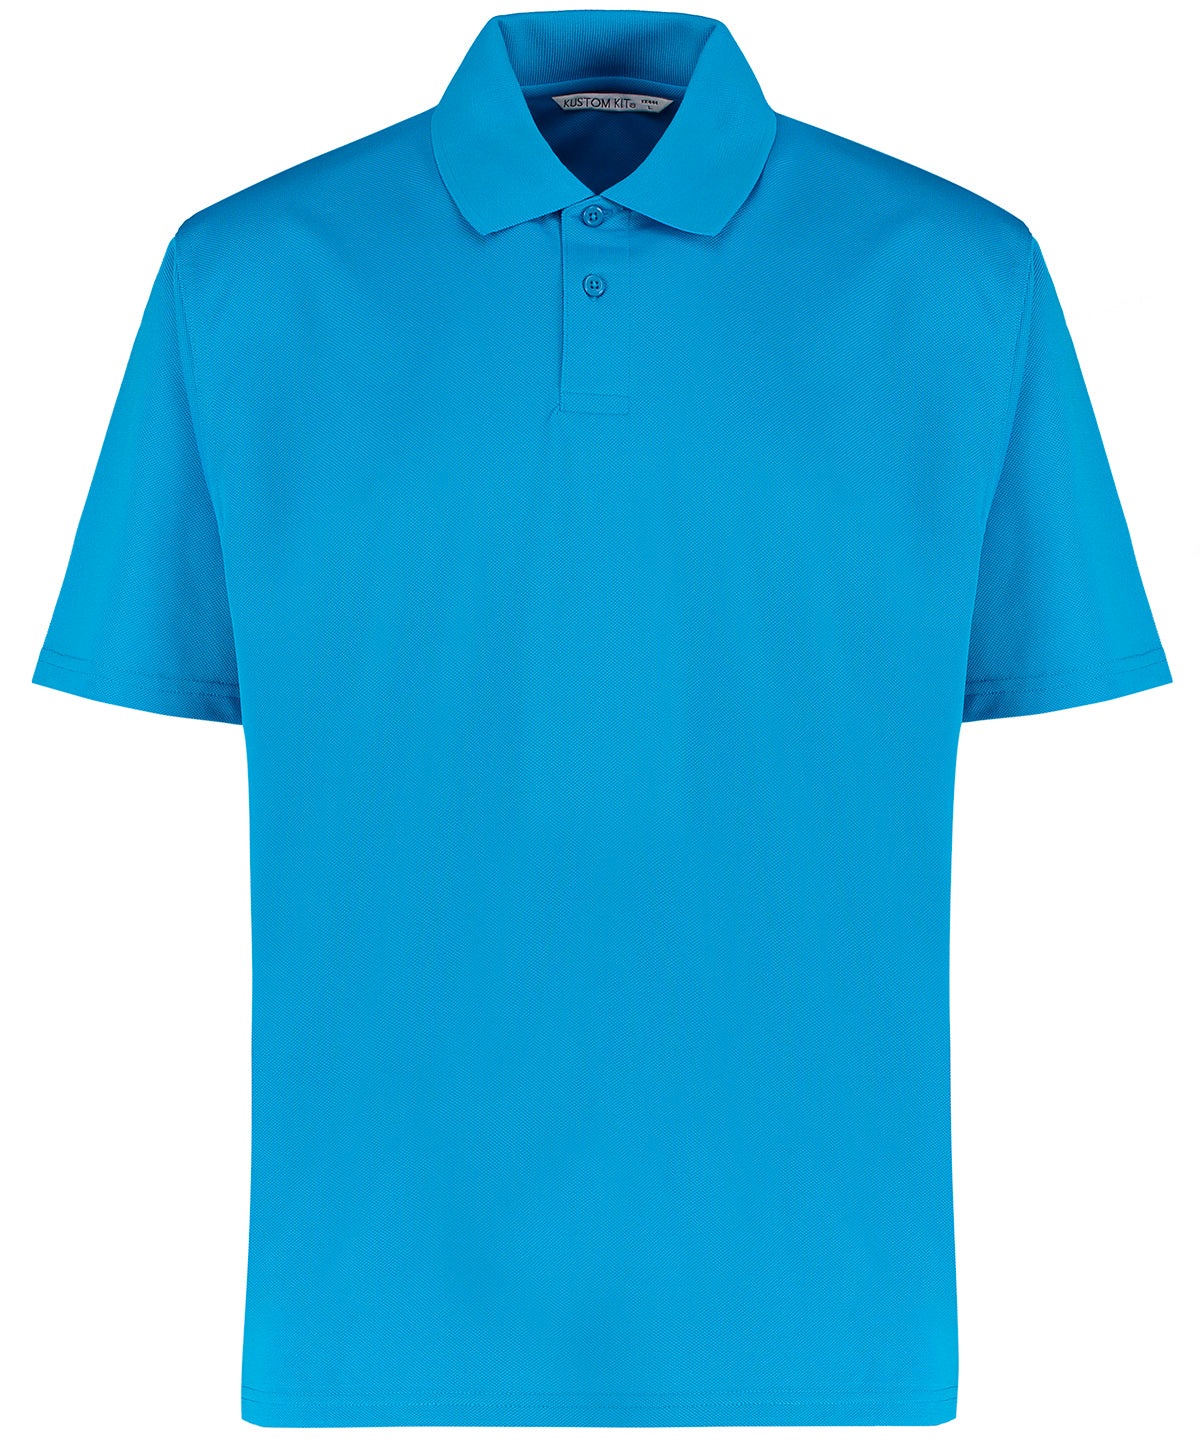 Personalised Polo Shirts - Mid Blue Kustom Kit Cooltex® plus piqué polo (regular fit)